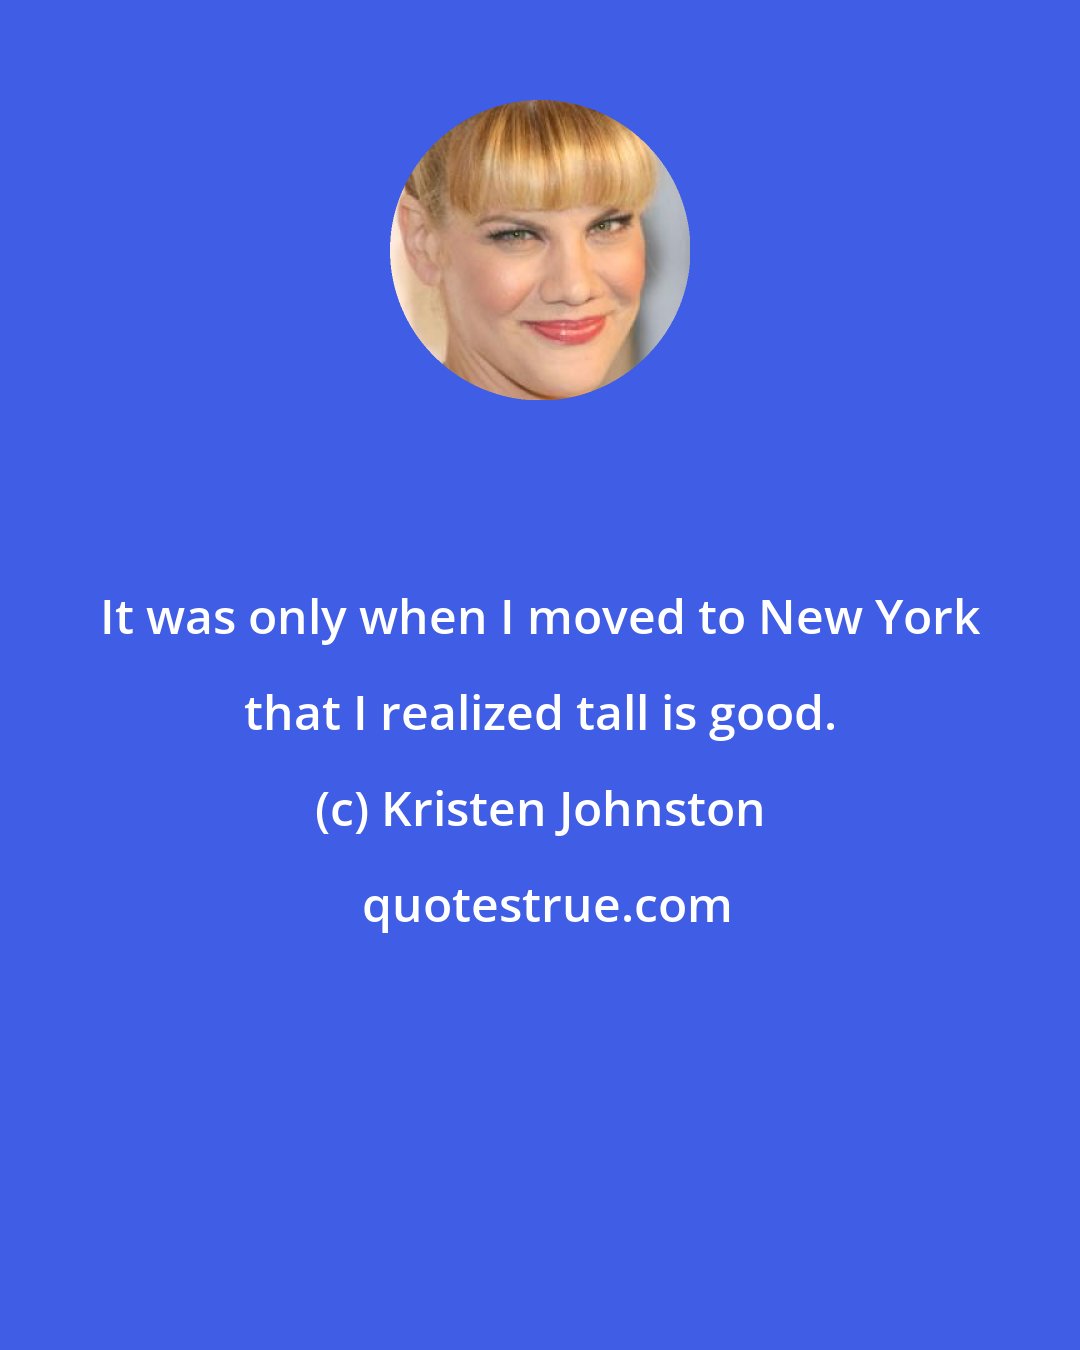 Kristen Johnston: It was only when I moved to New York that I realized tall is good.